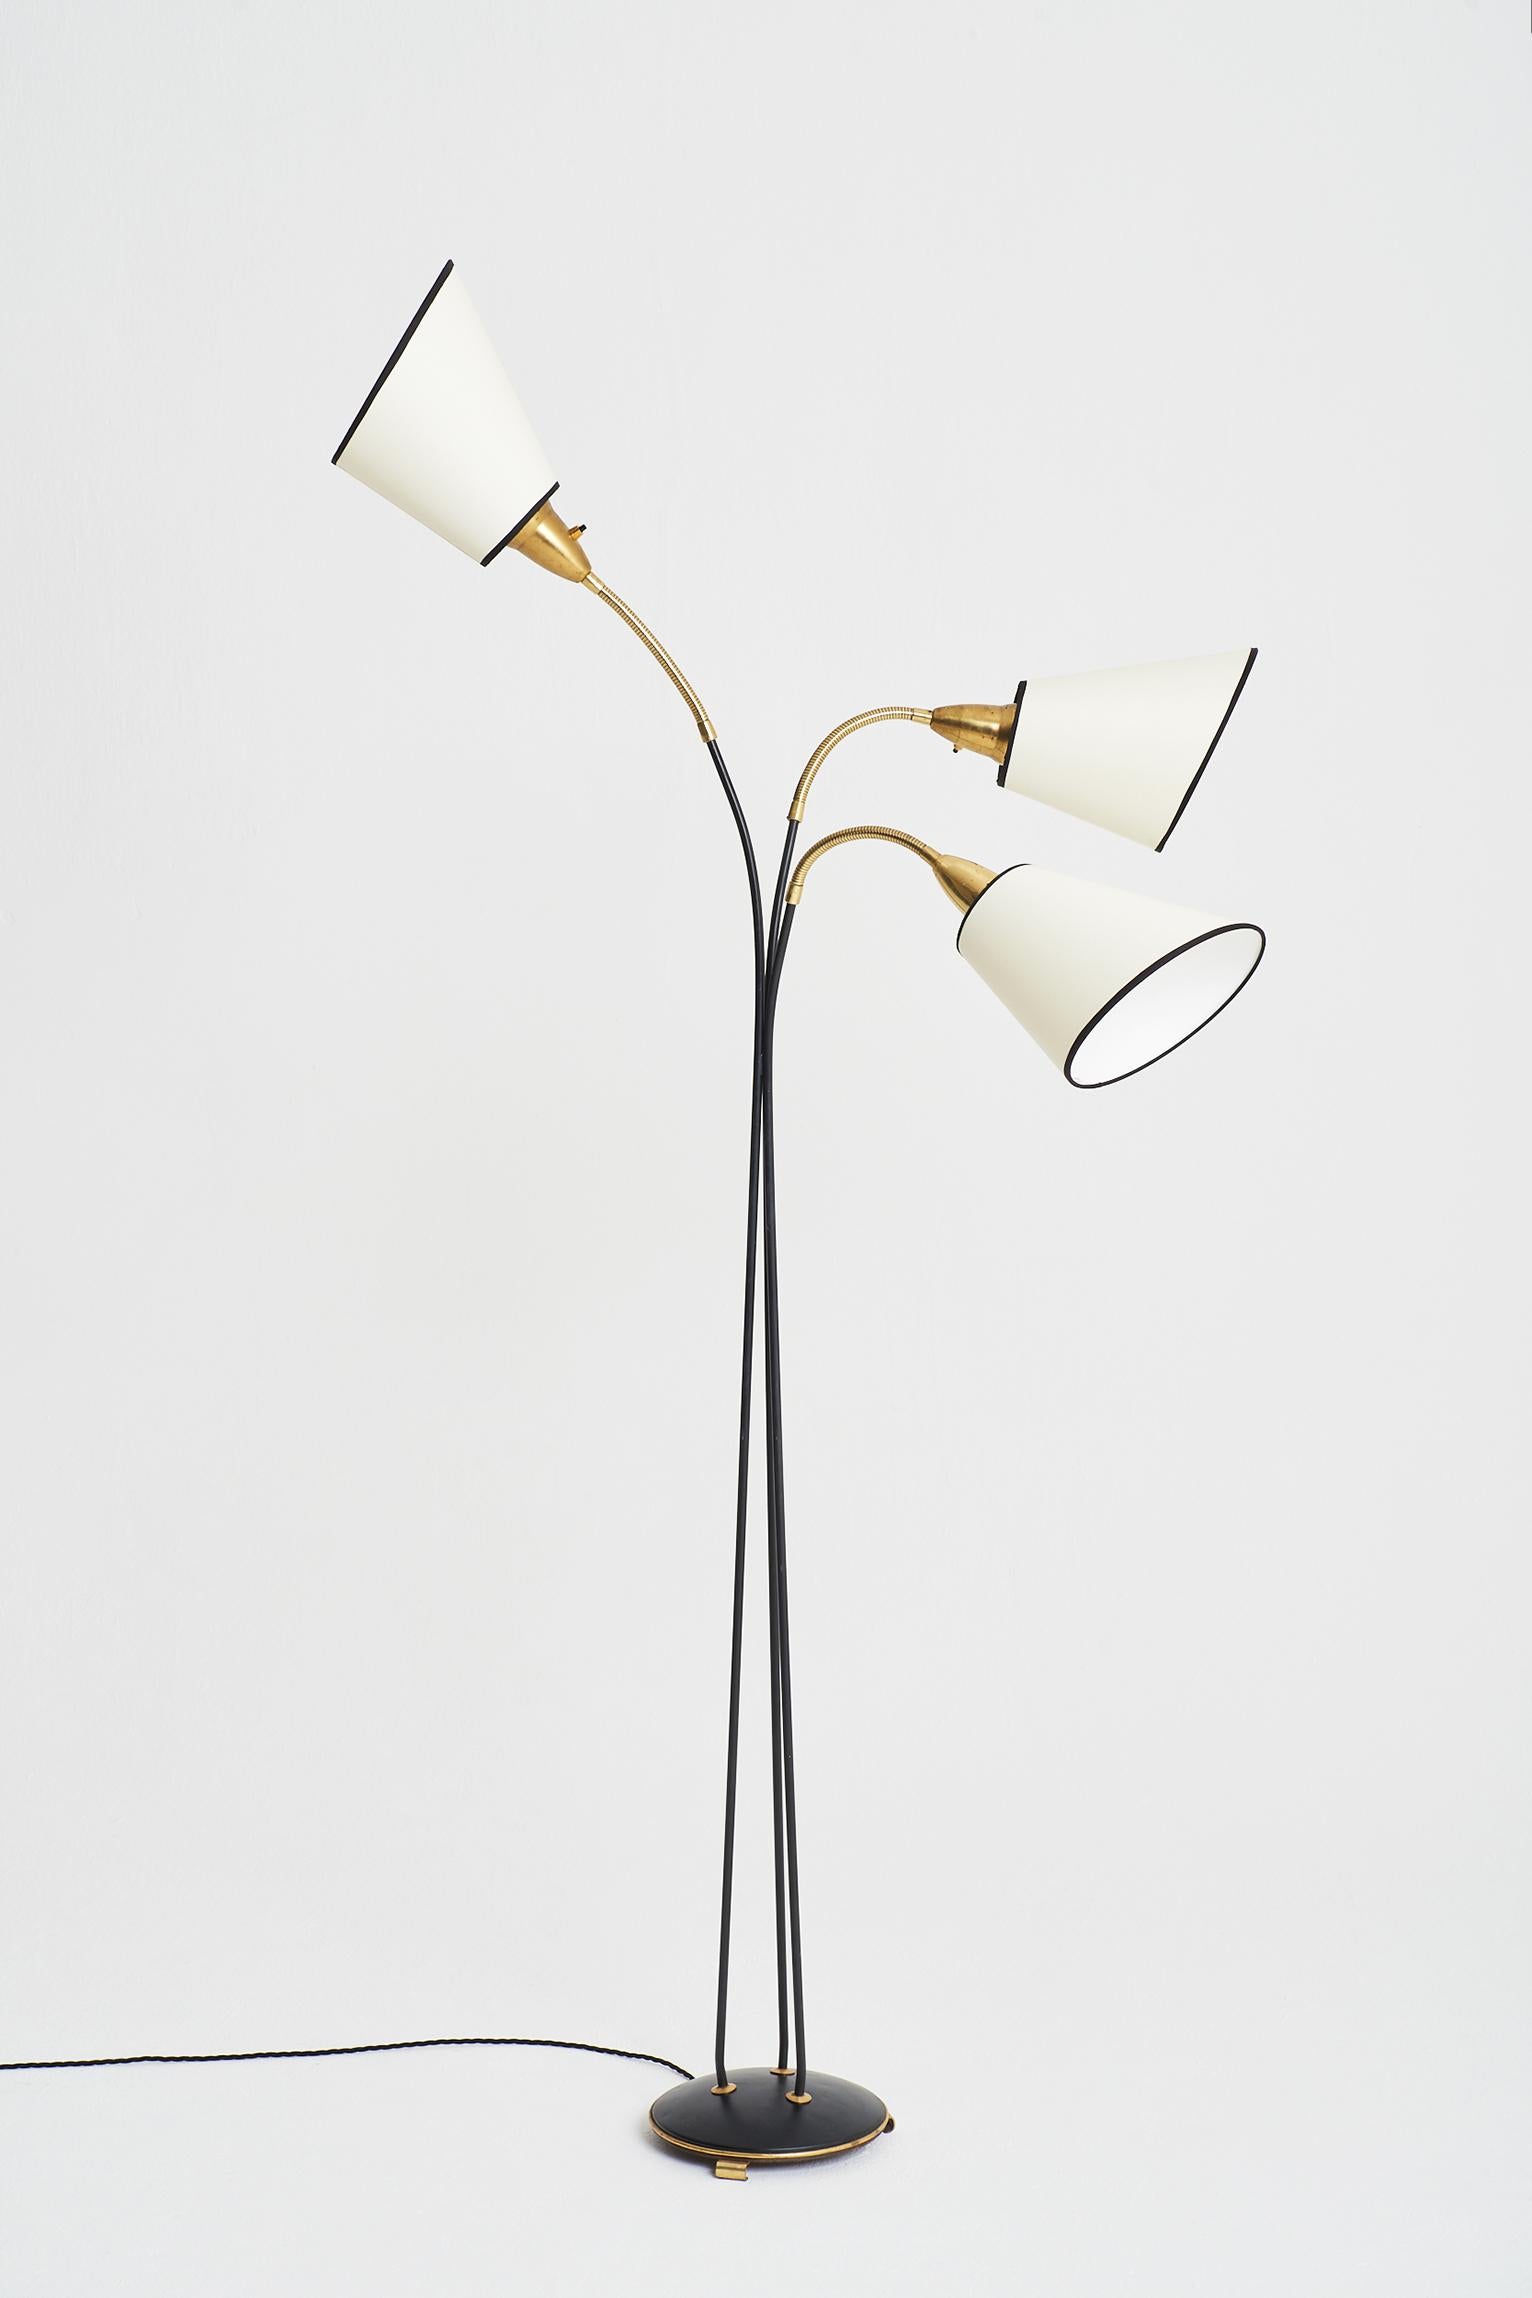 A black enamelled iron and brass three-arm floor lamp, with bespoke shades.
Sweden, third quarter of the 20th century.